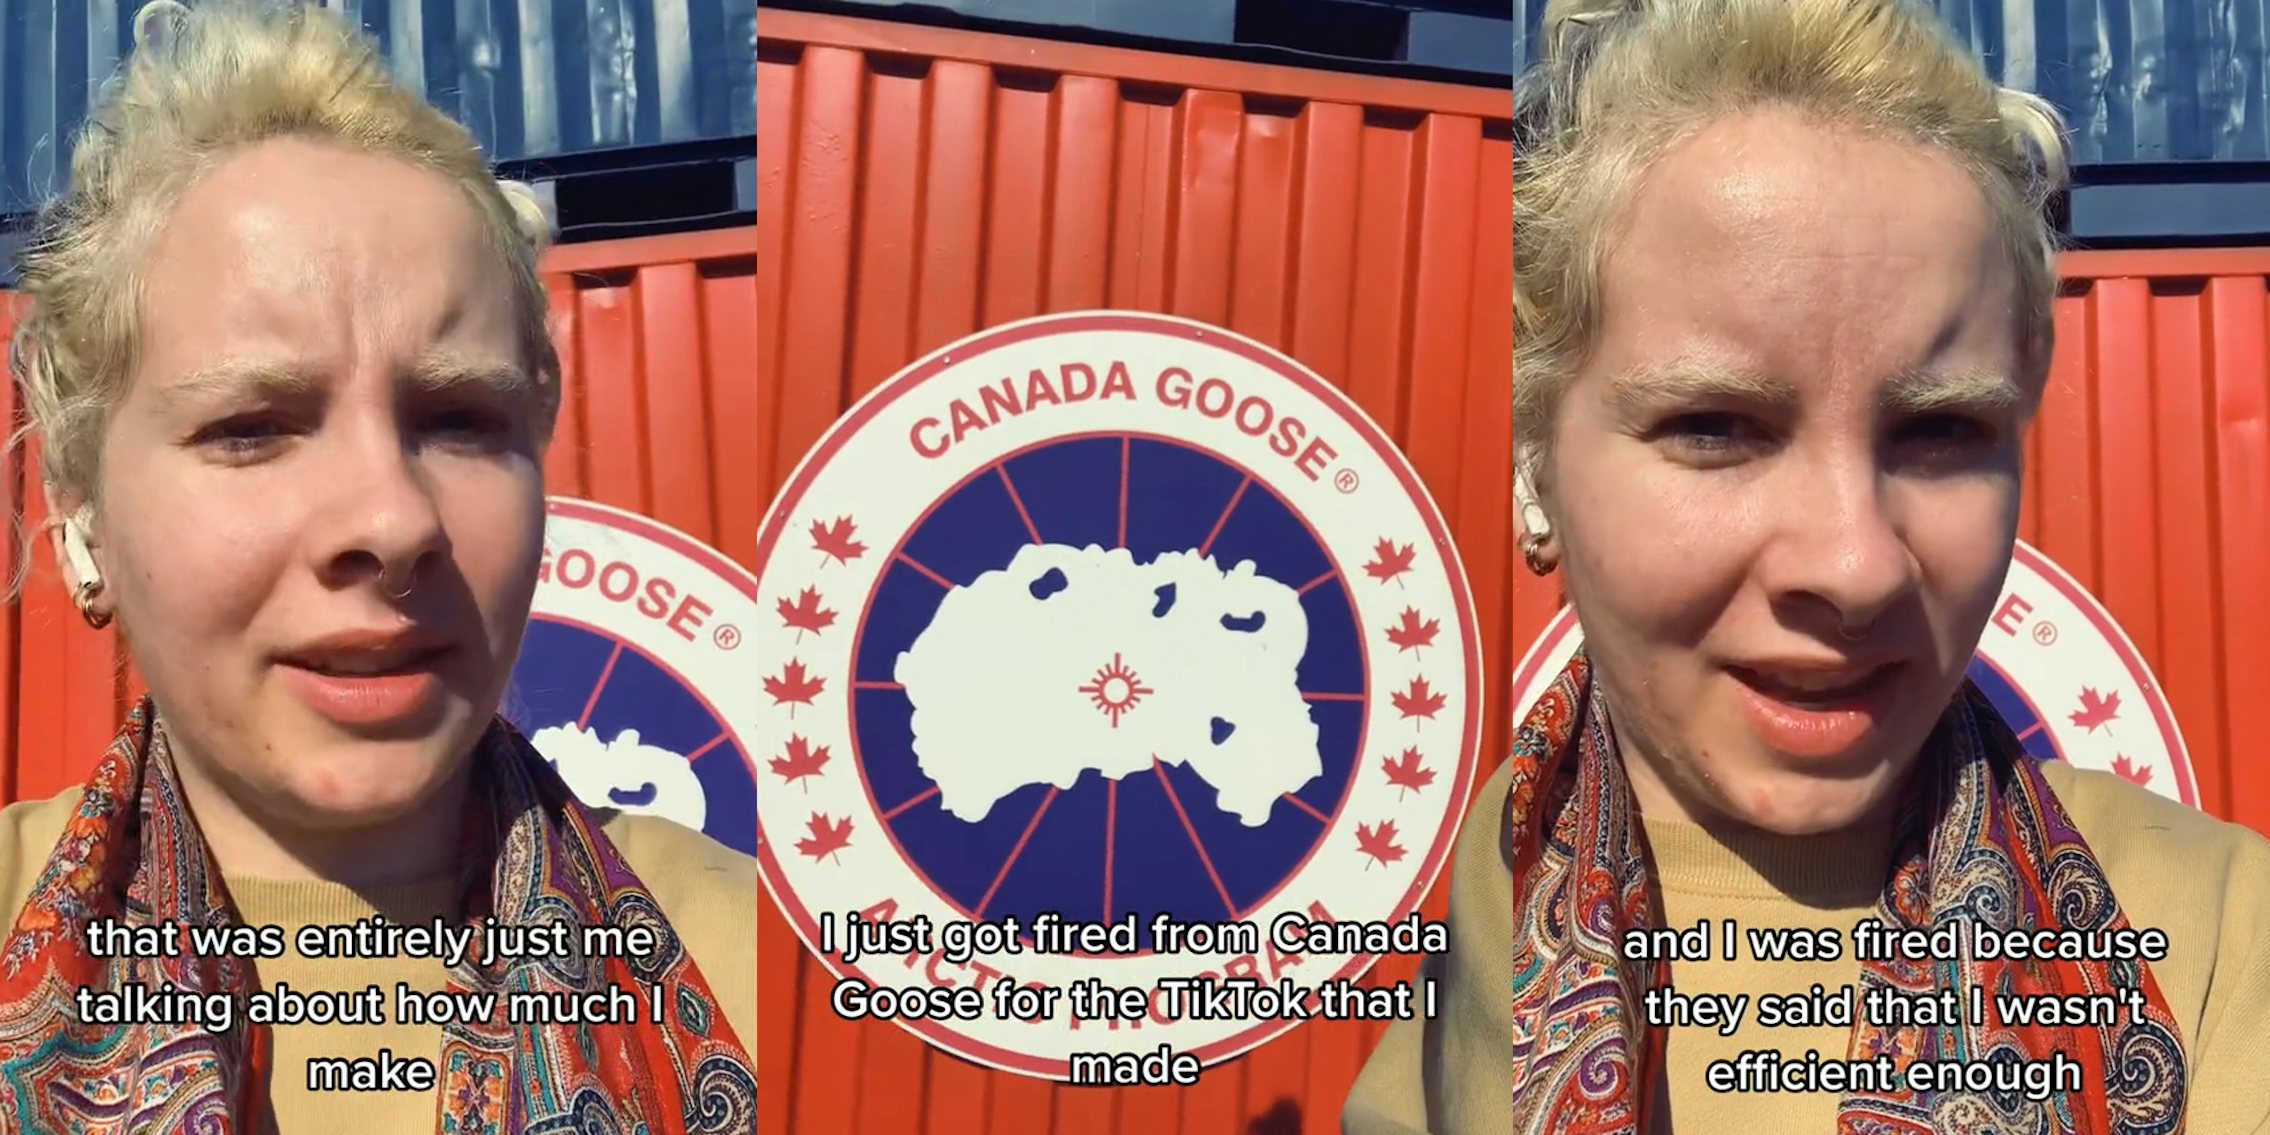 Canada Goose employee speaking caption 'that was entirely just me talking about how much I make' (l) Canada Goose logo on shipping container caption 'I just got fired from Canada Goose for the TikTok that I made' (c) Canada Goose employee speaking caption 'and I was fired because they said that I wasn't efficient enough' (r)